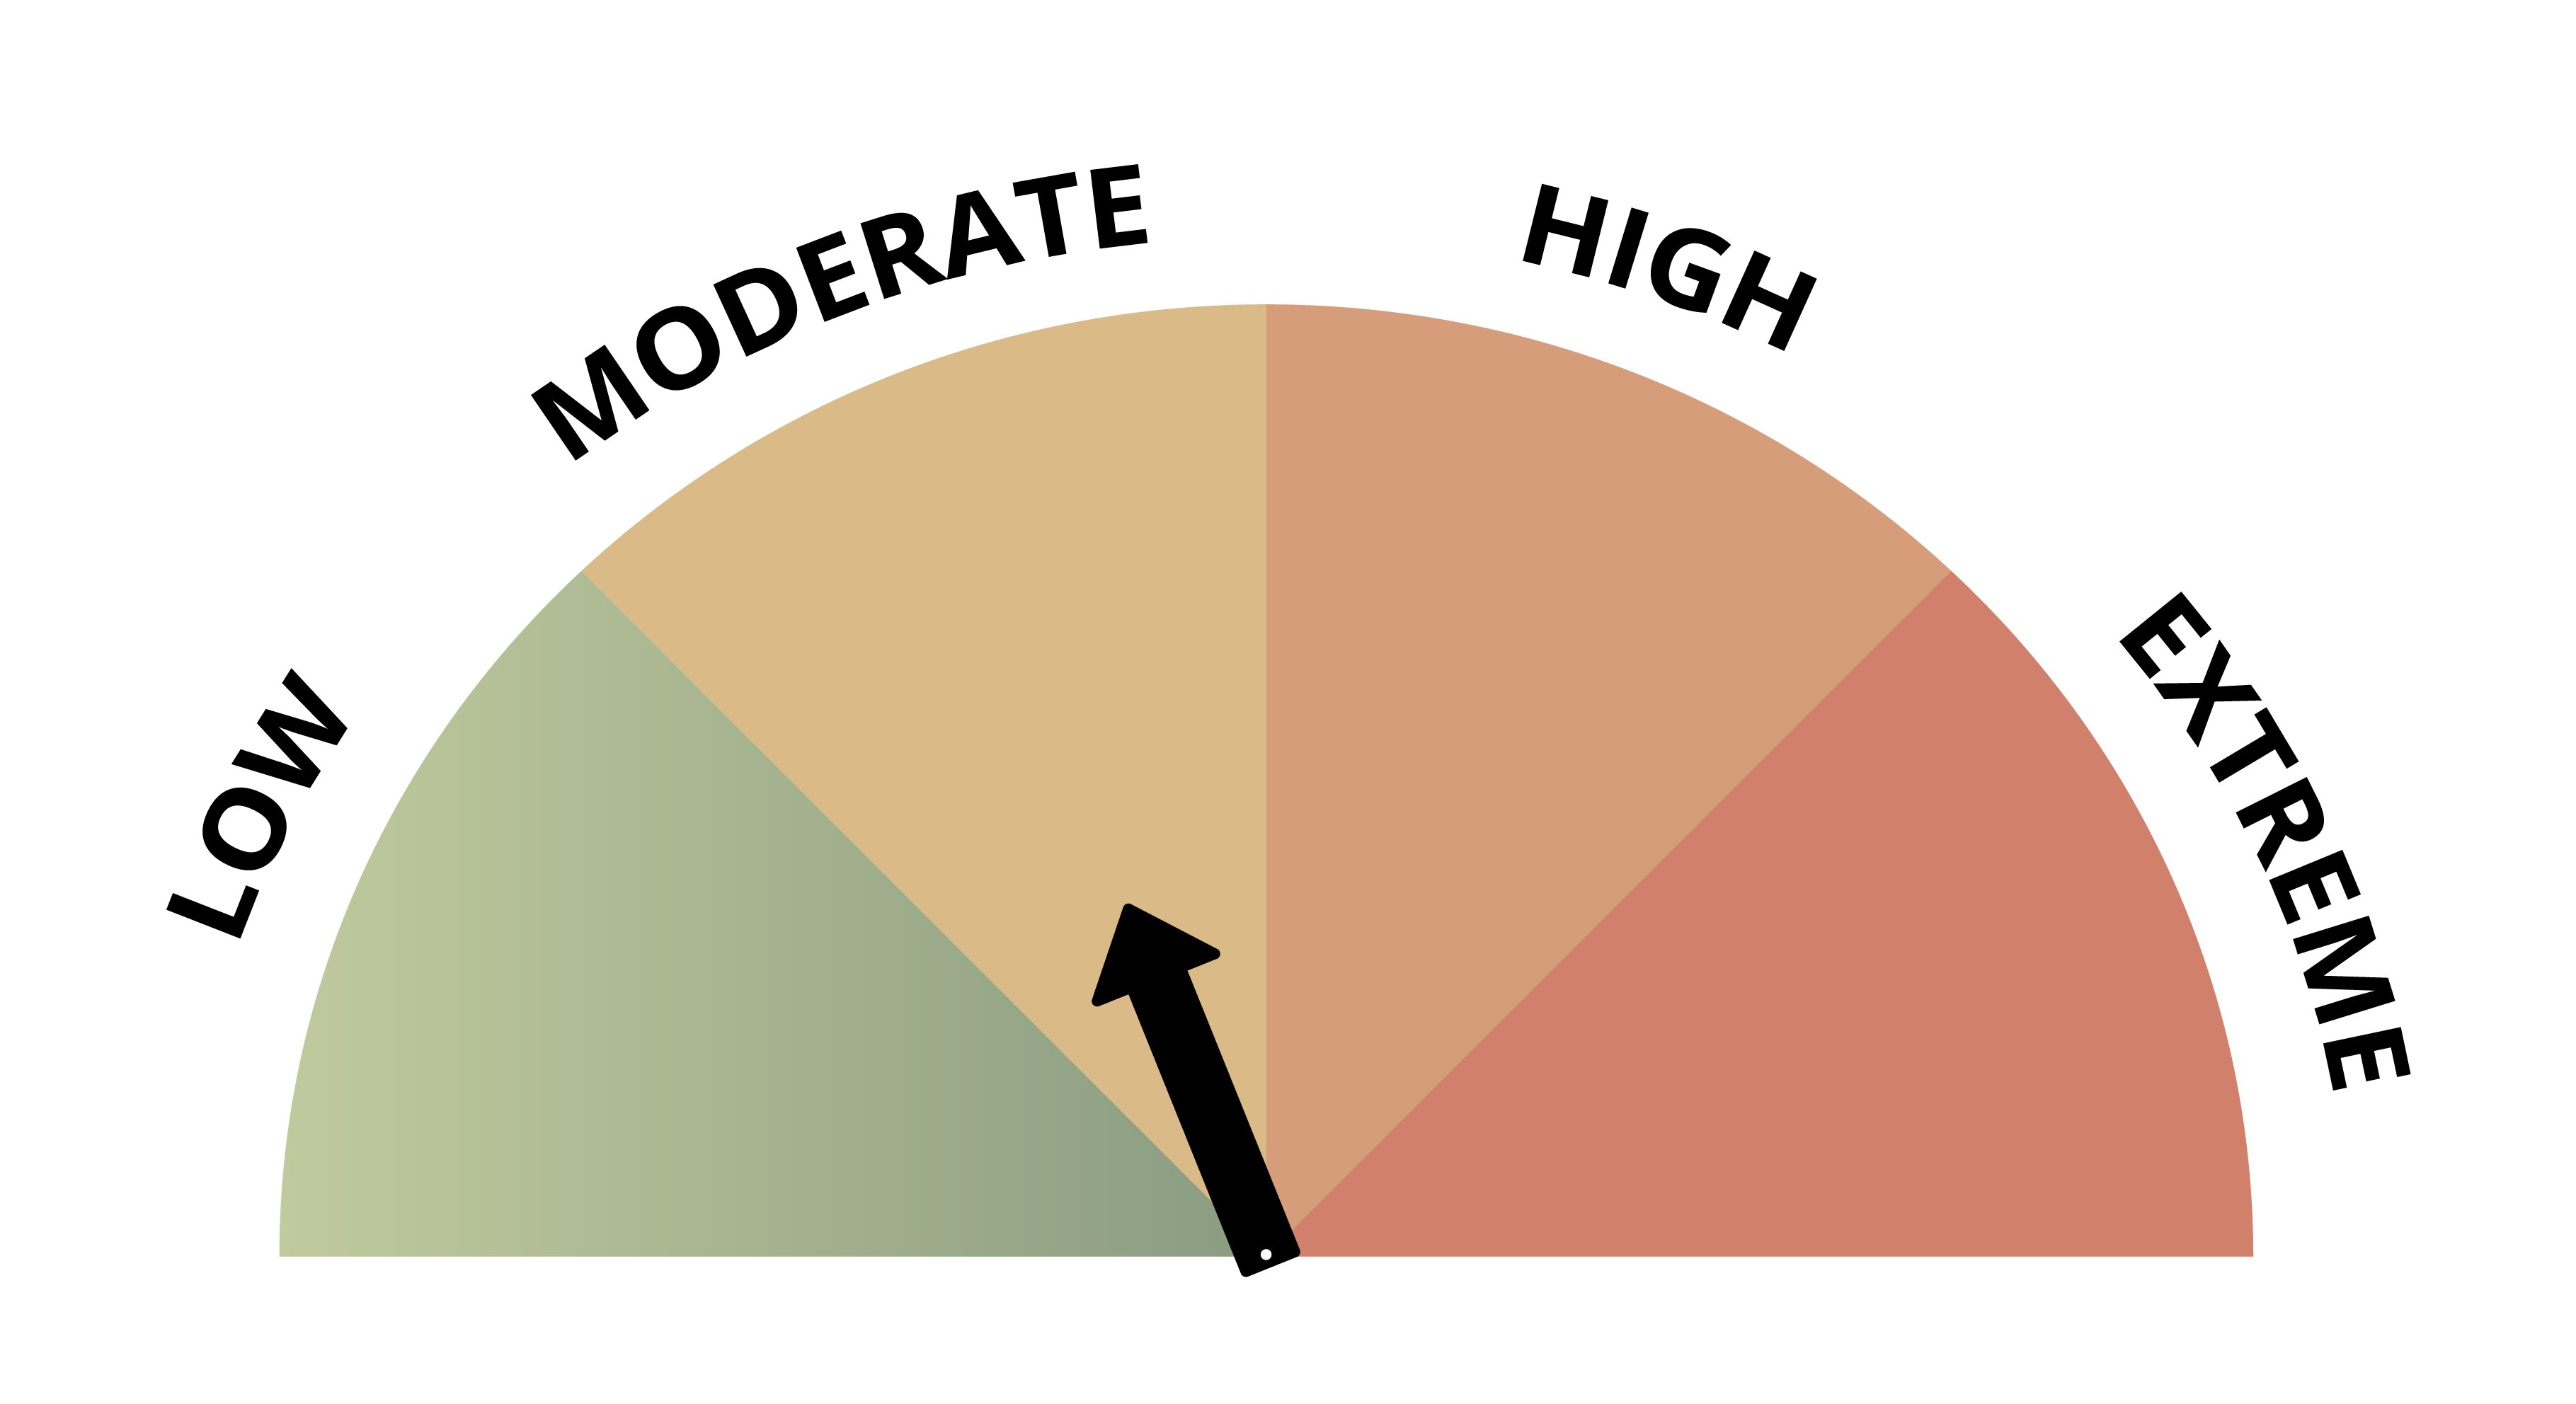 The current fire danger rating is moderate